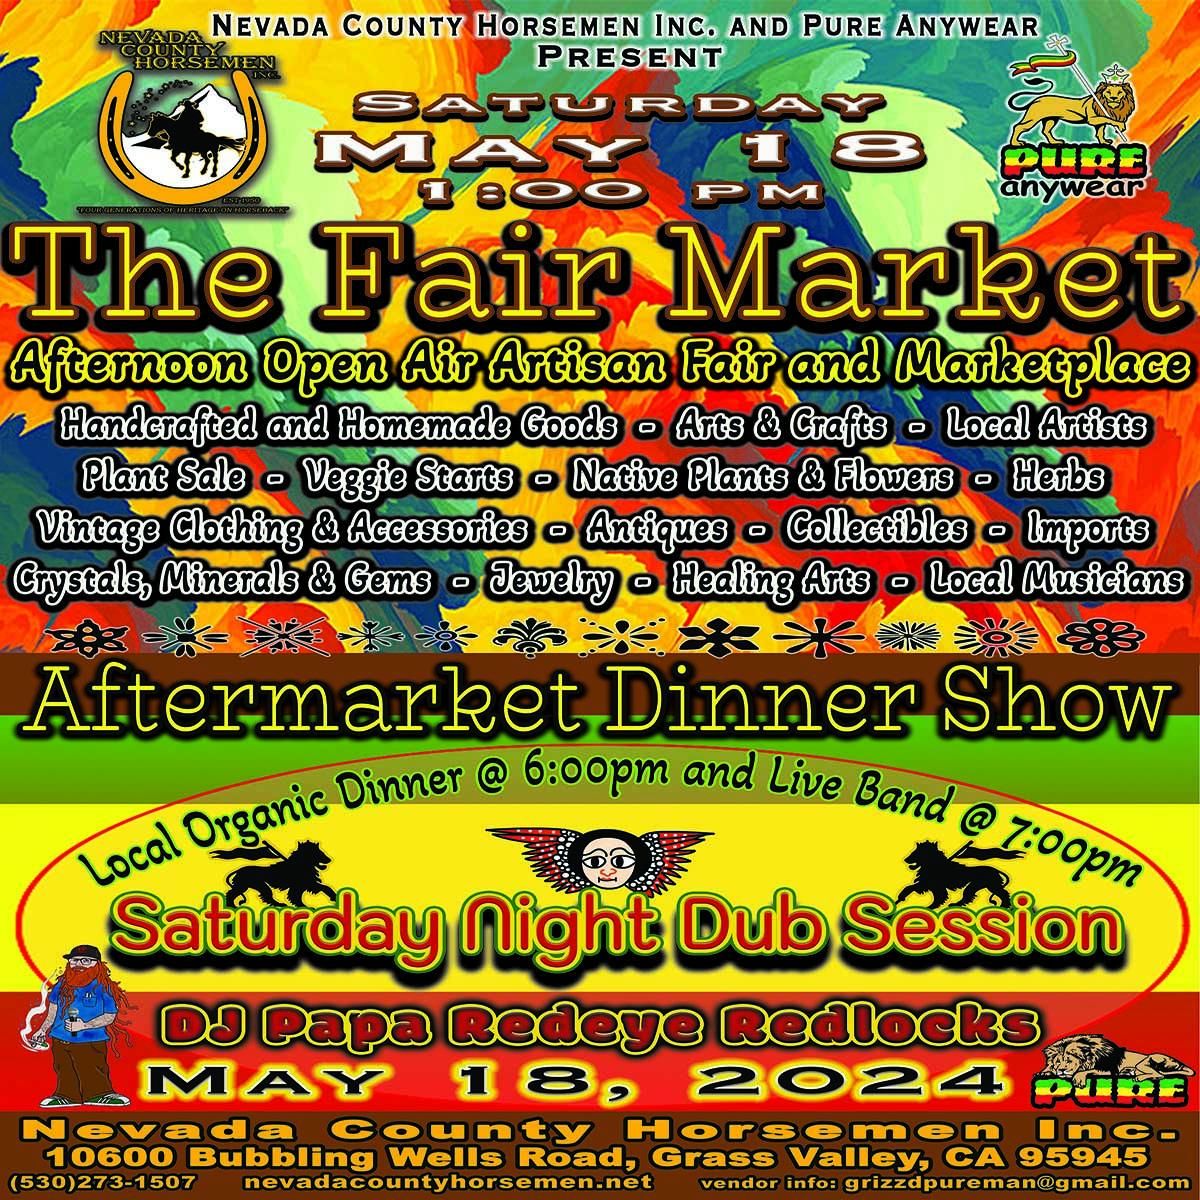 The Fair Market and Aftermarket Dinner Show